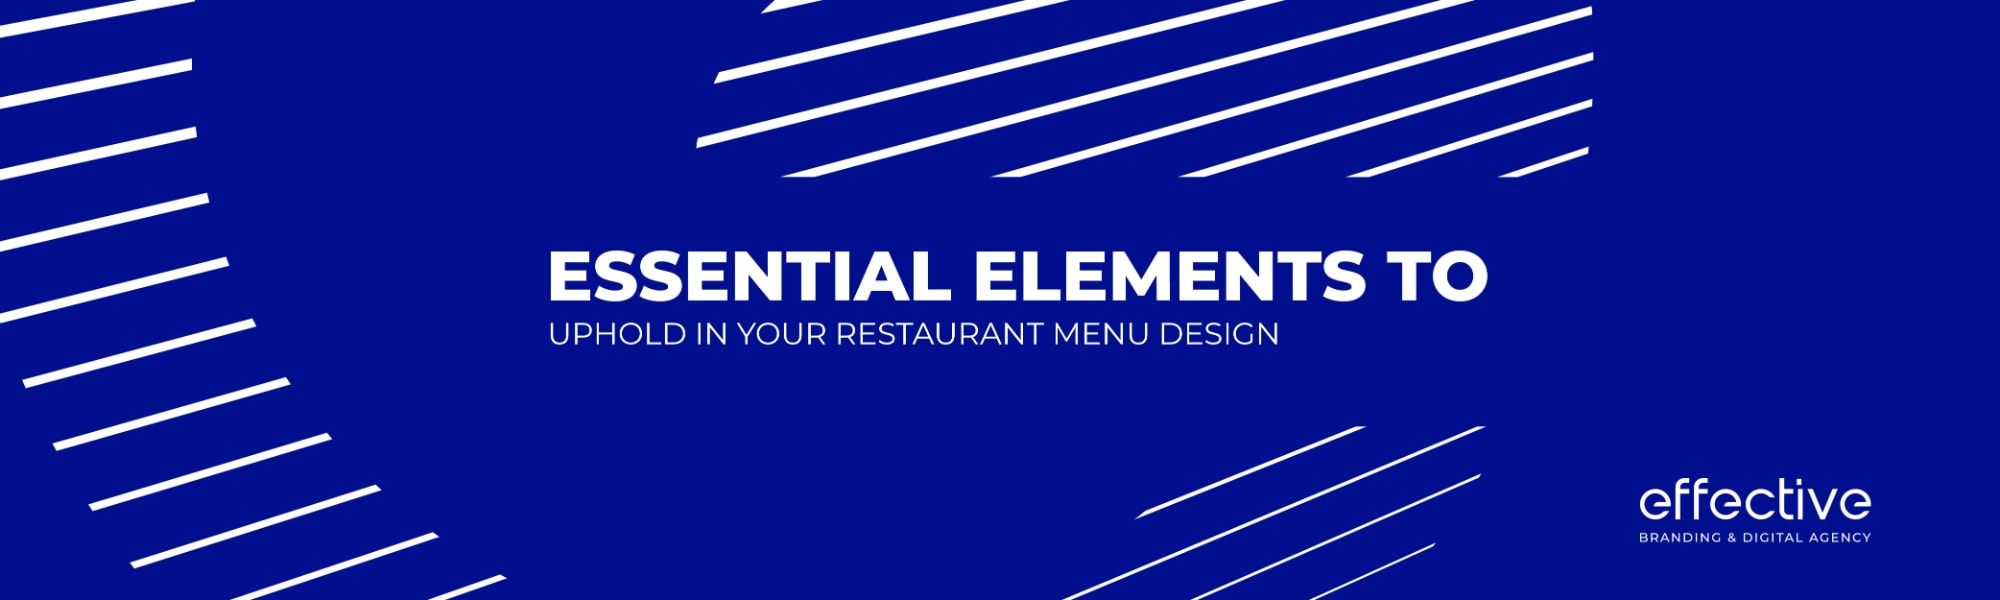 Essential Elements to Uphold in Your Restaurant Menu Design